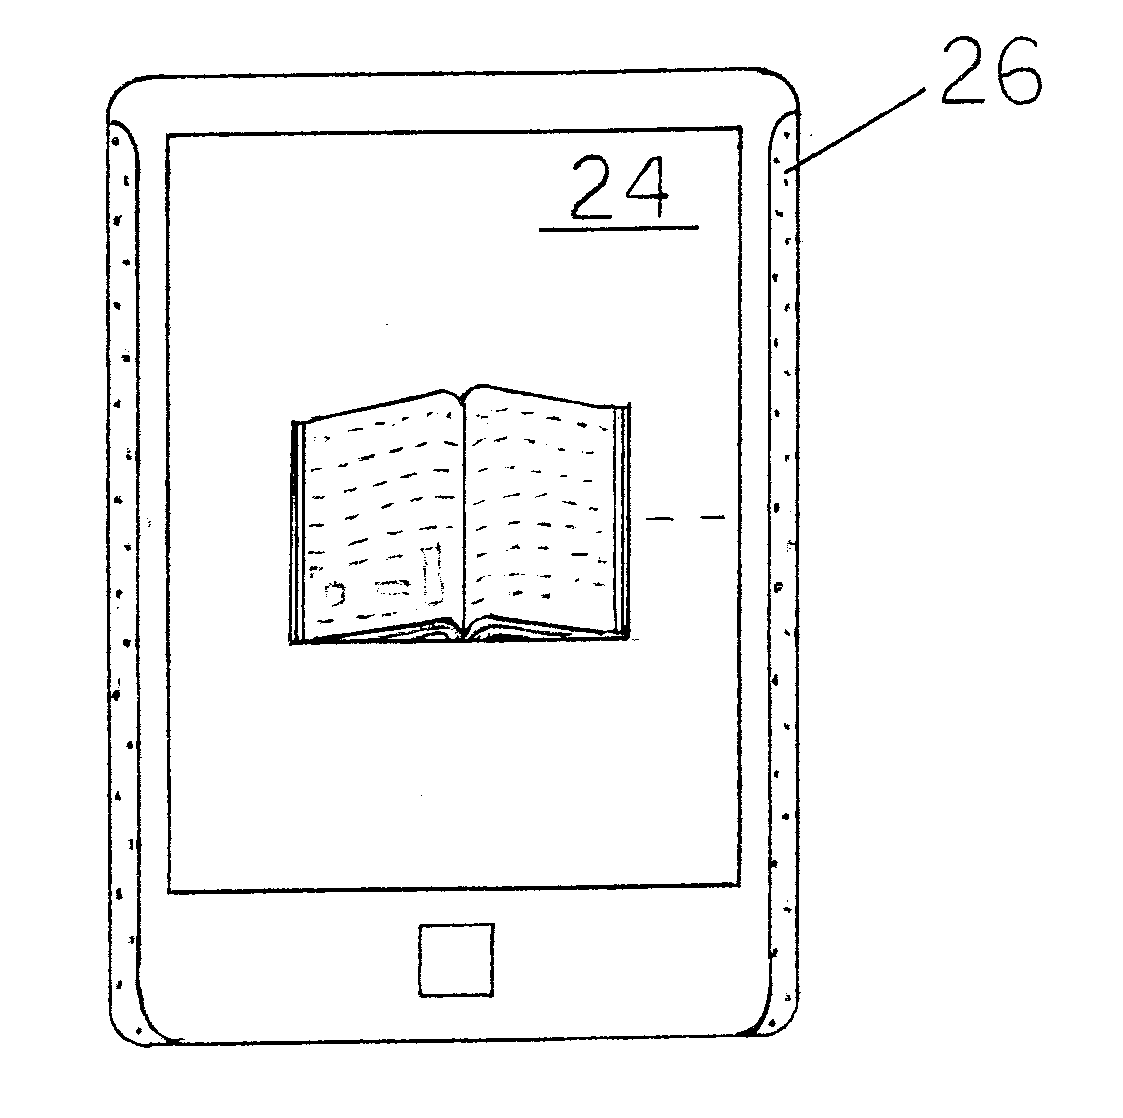 Needle-less/wireless acupuncture system and method